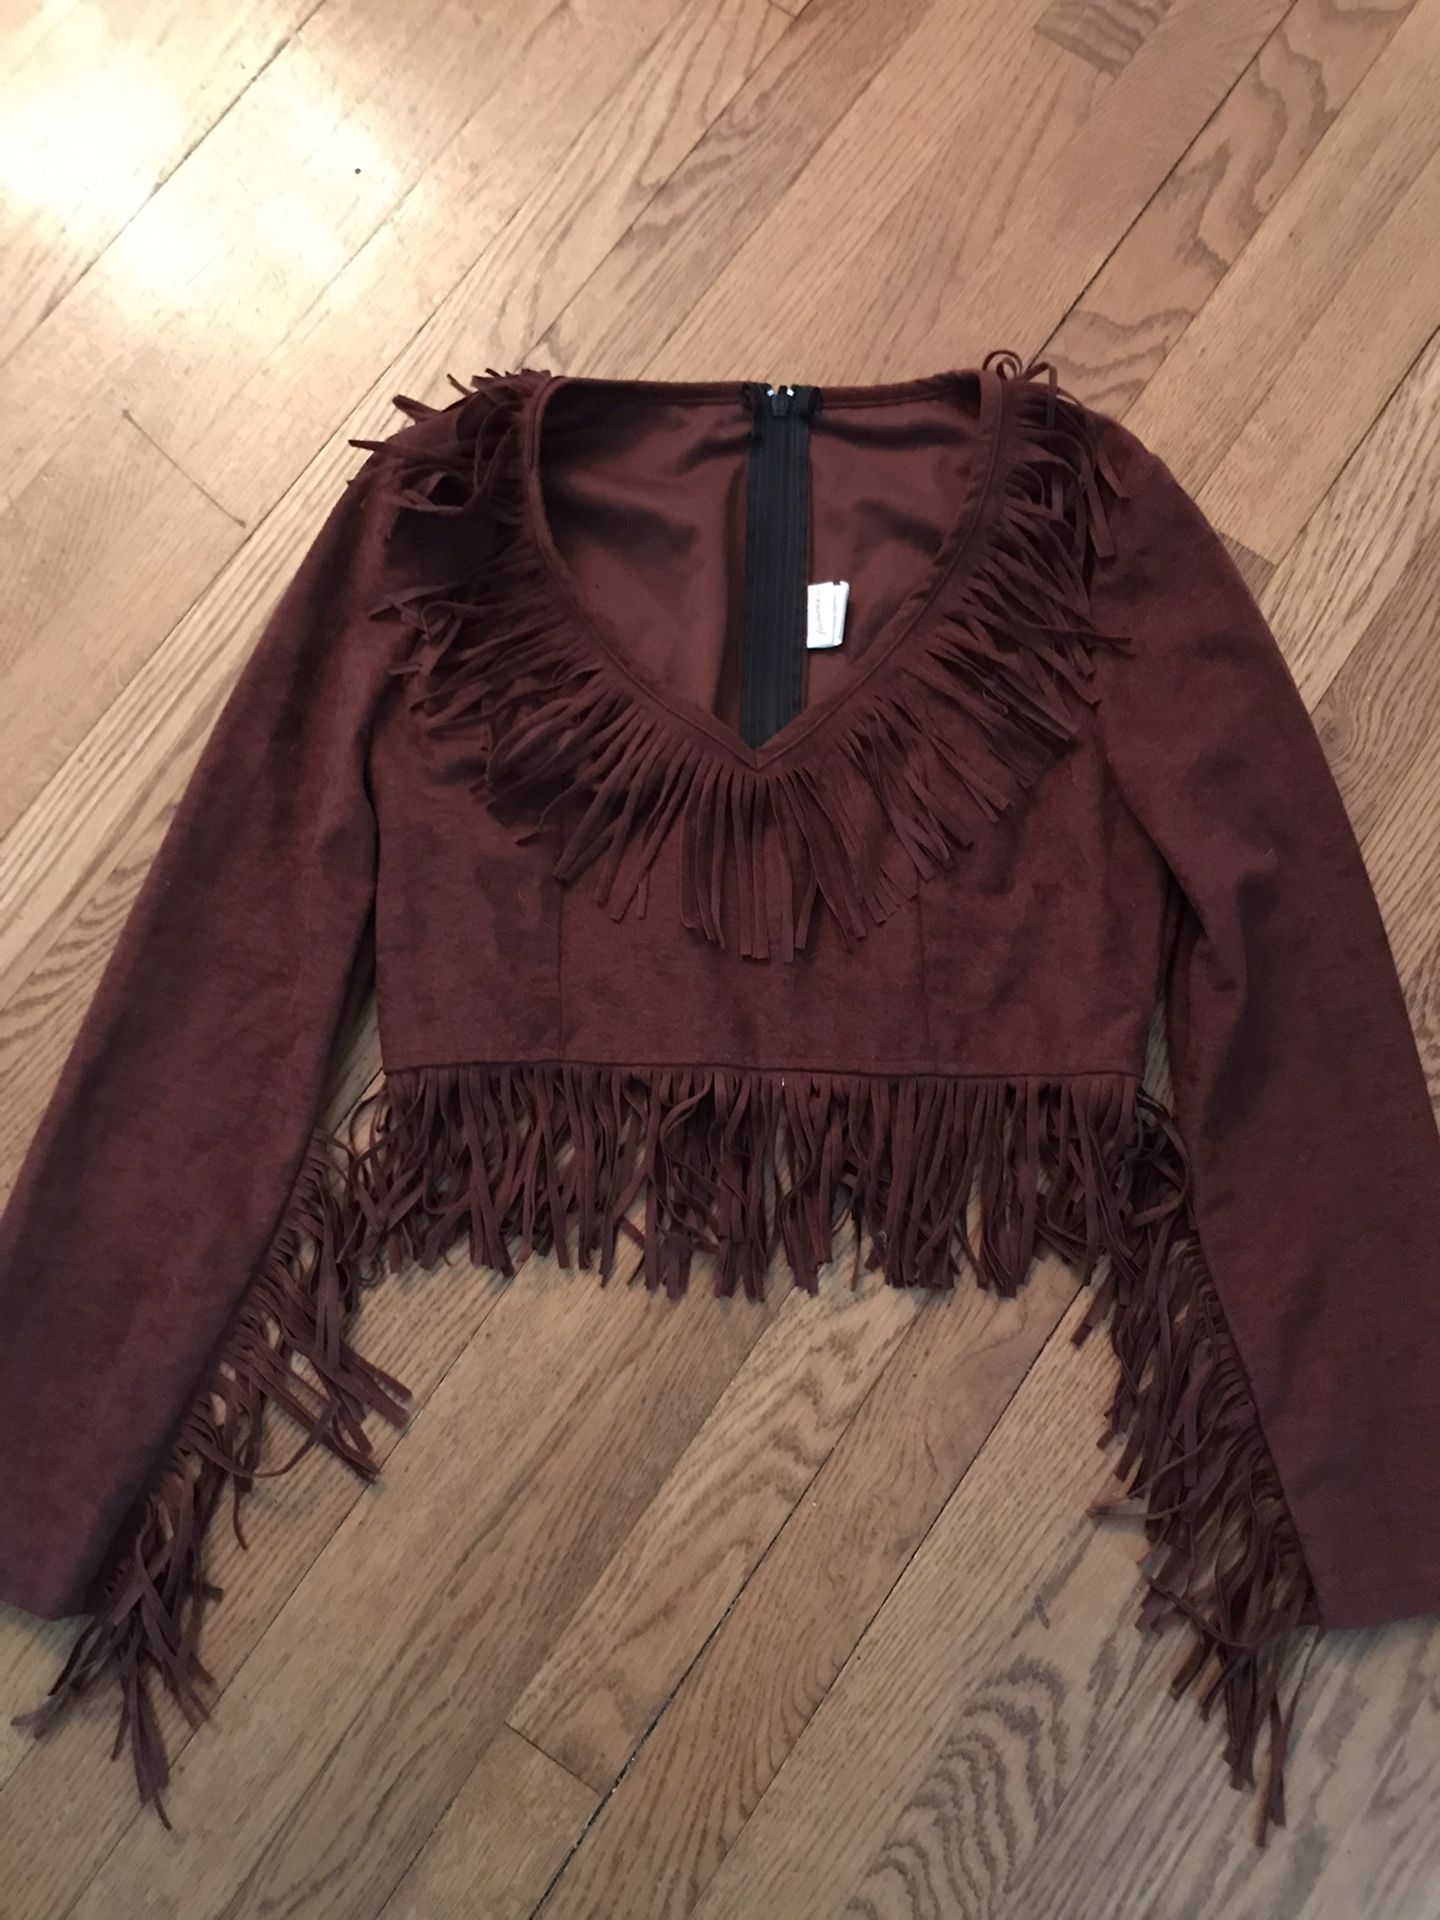 Vintage Faux Suede Crop Top With Fringes Size Small - Great For Halloween 